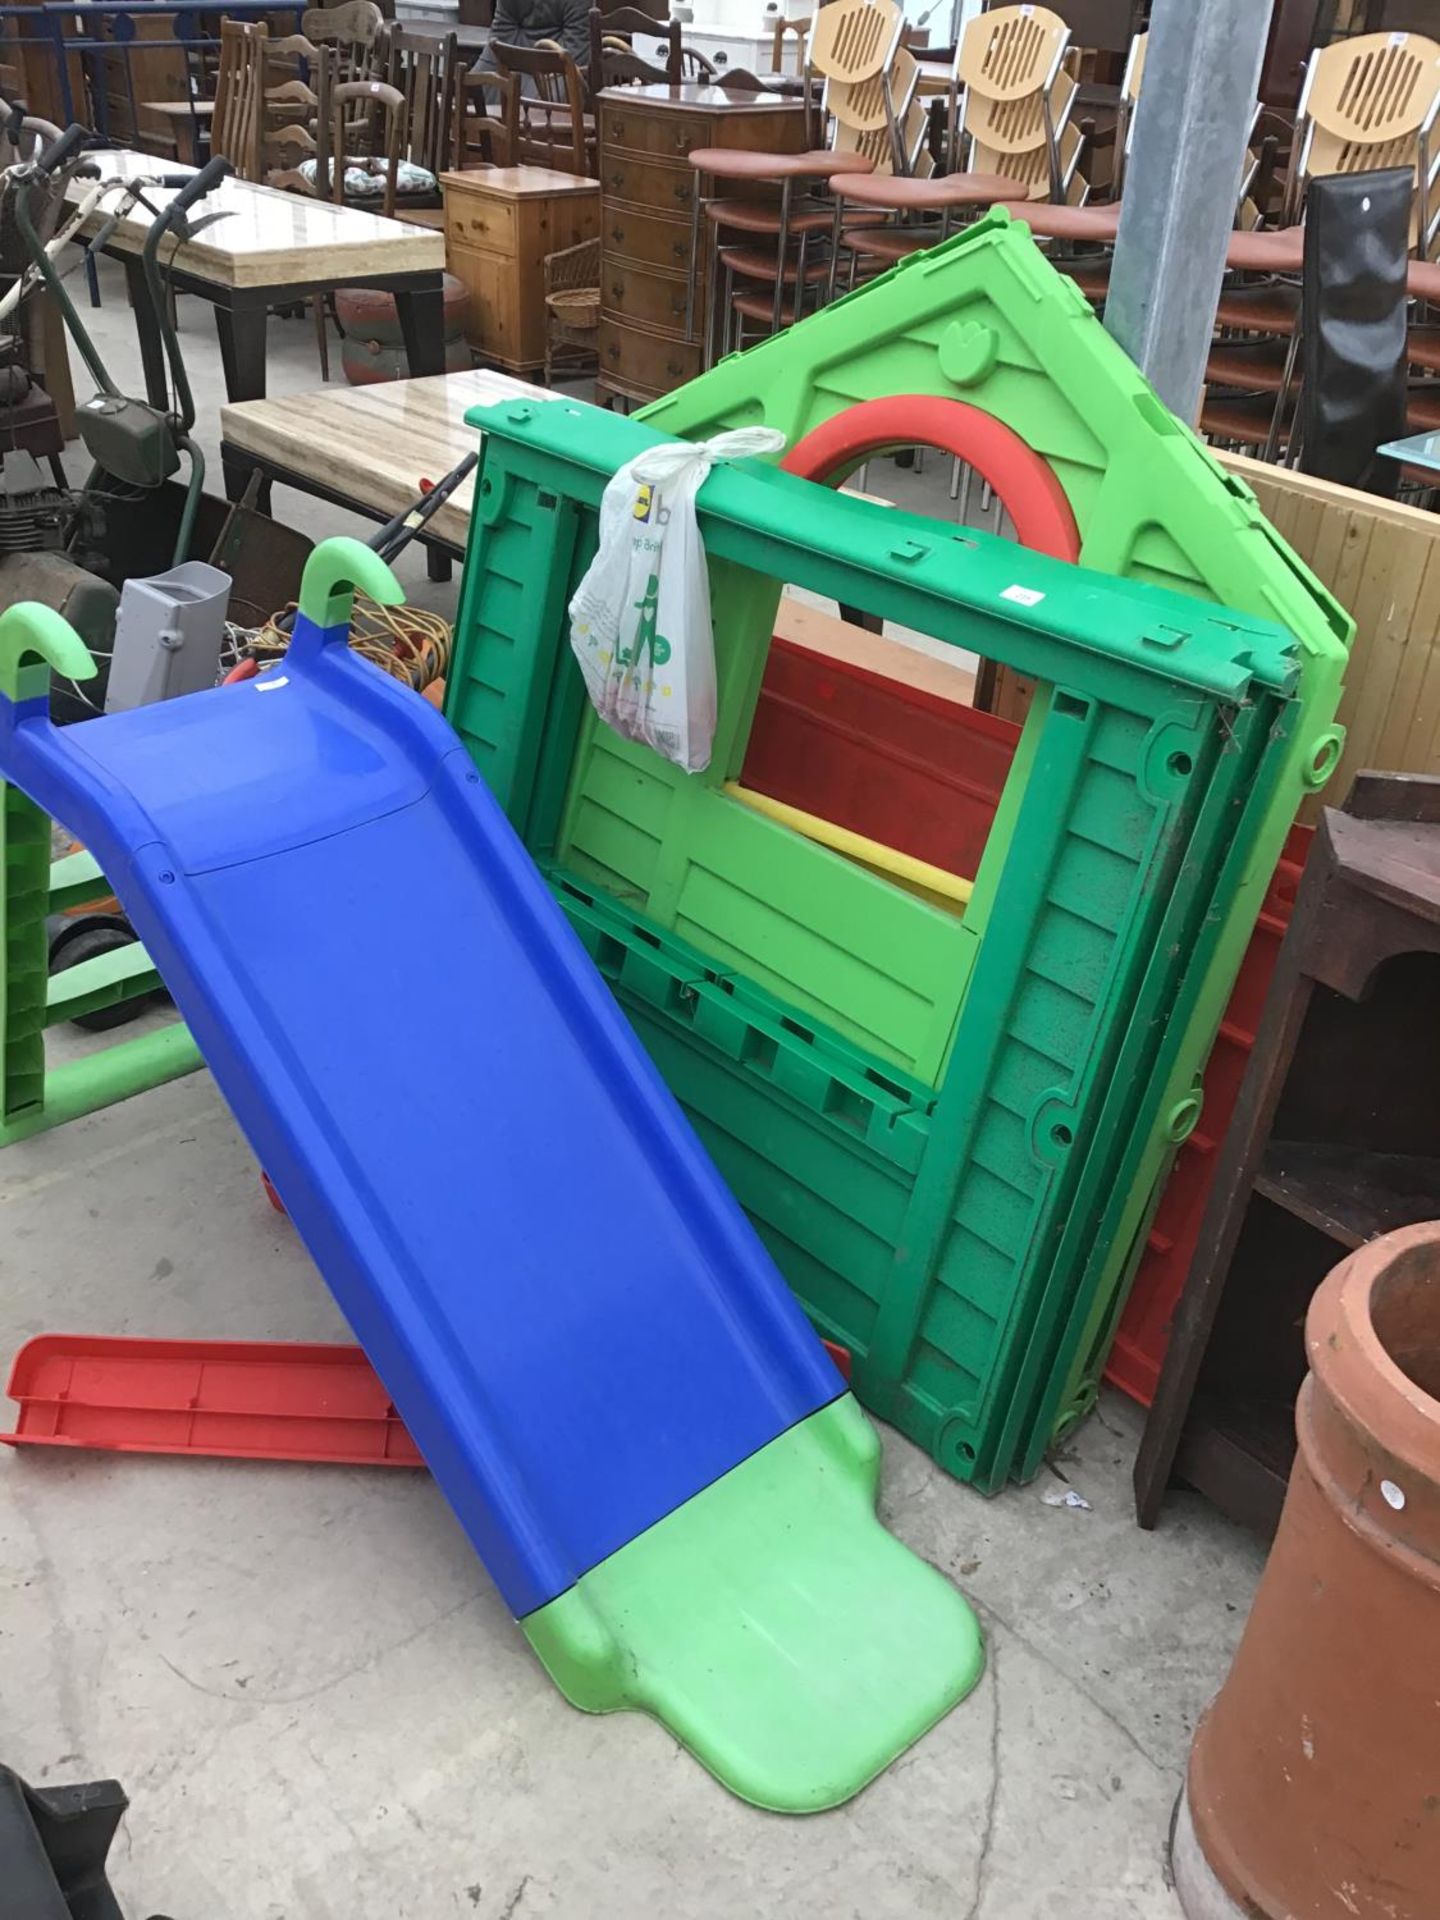 A LITTLE TIKES WENDY HOUSE (COMPLETE WITH ATTACHMENT PIECES) AND A CHILDS SLIDE